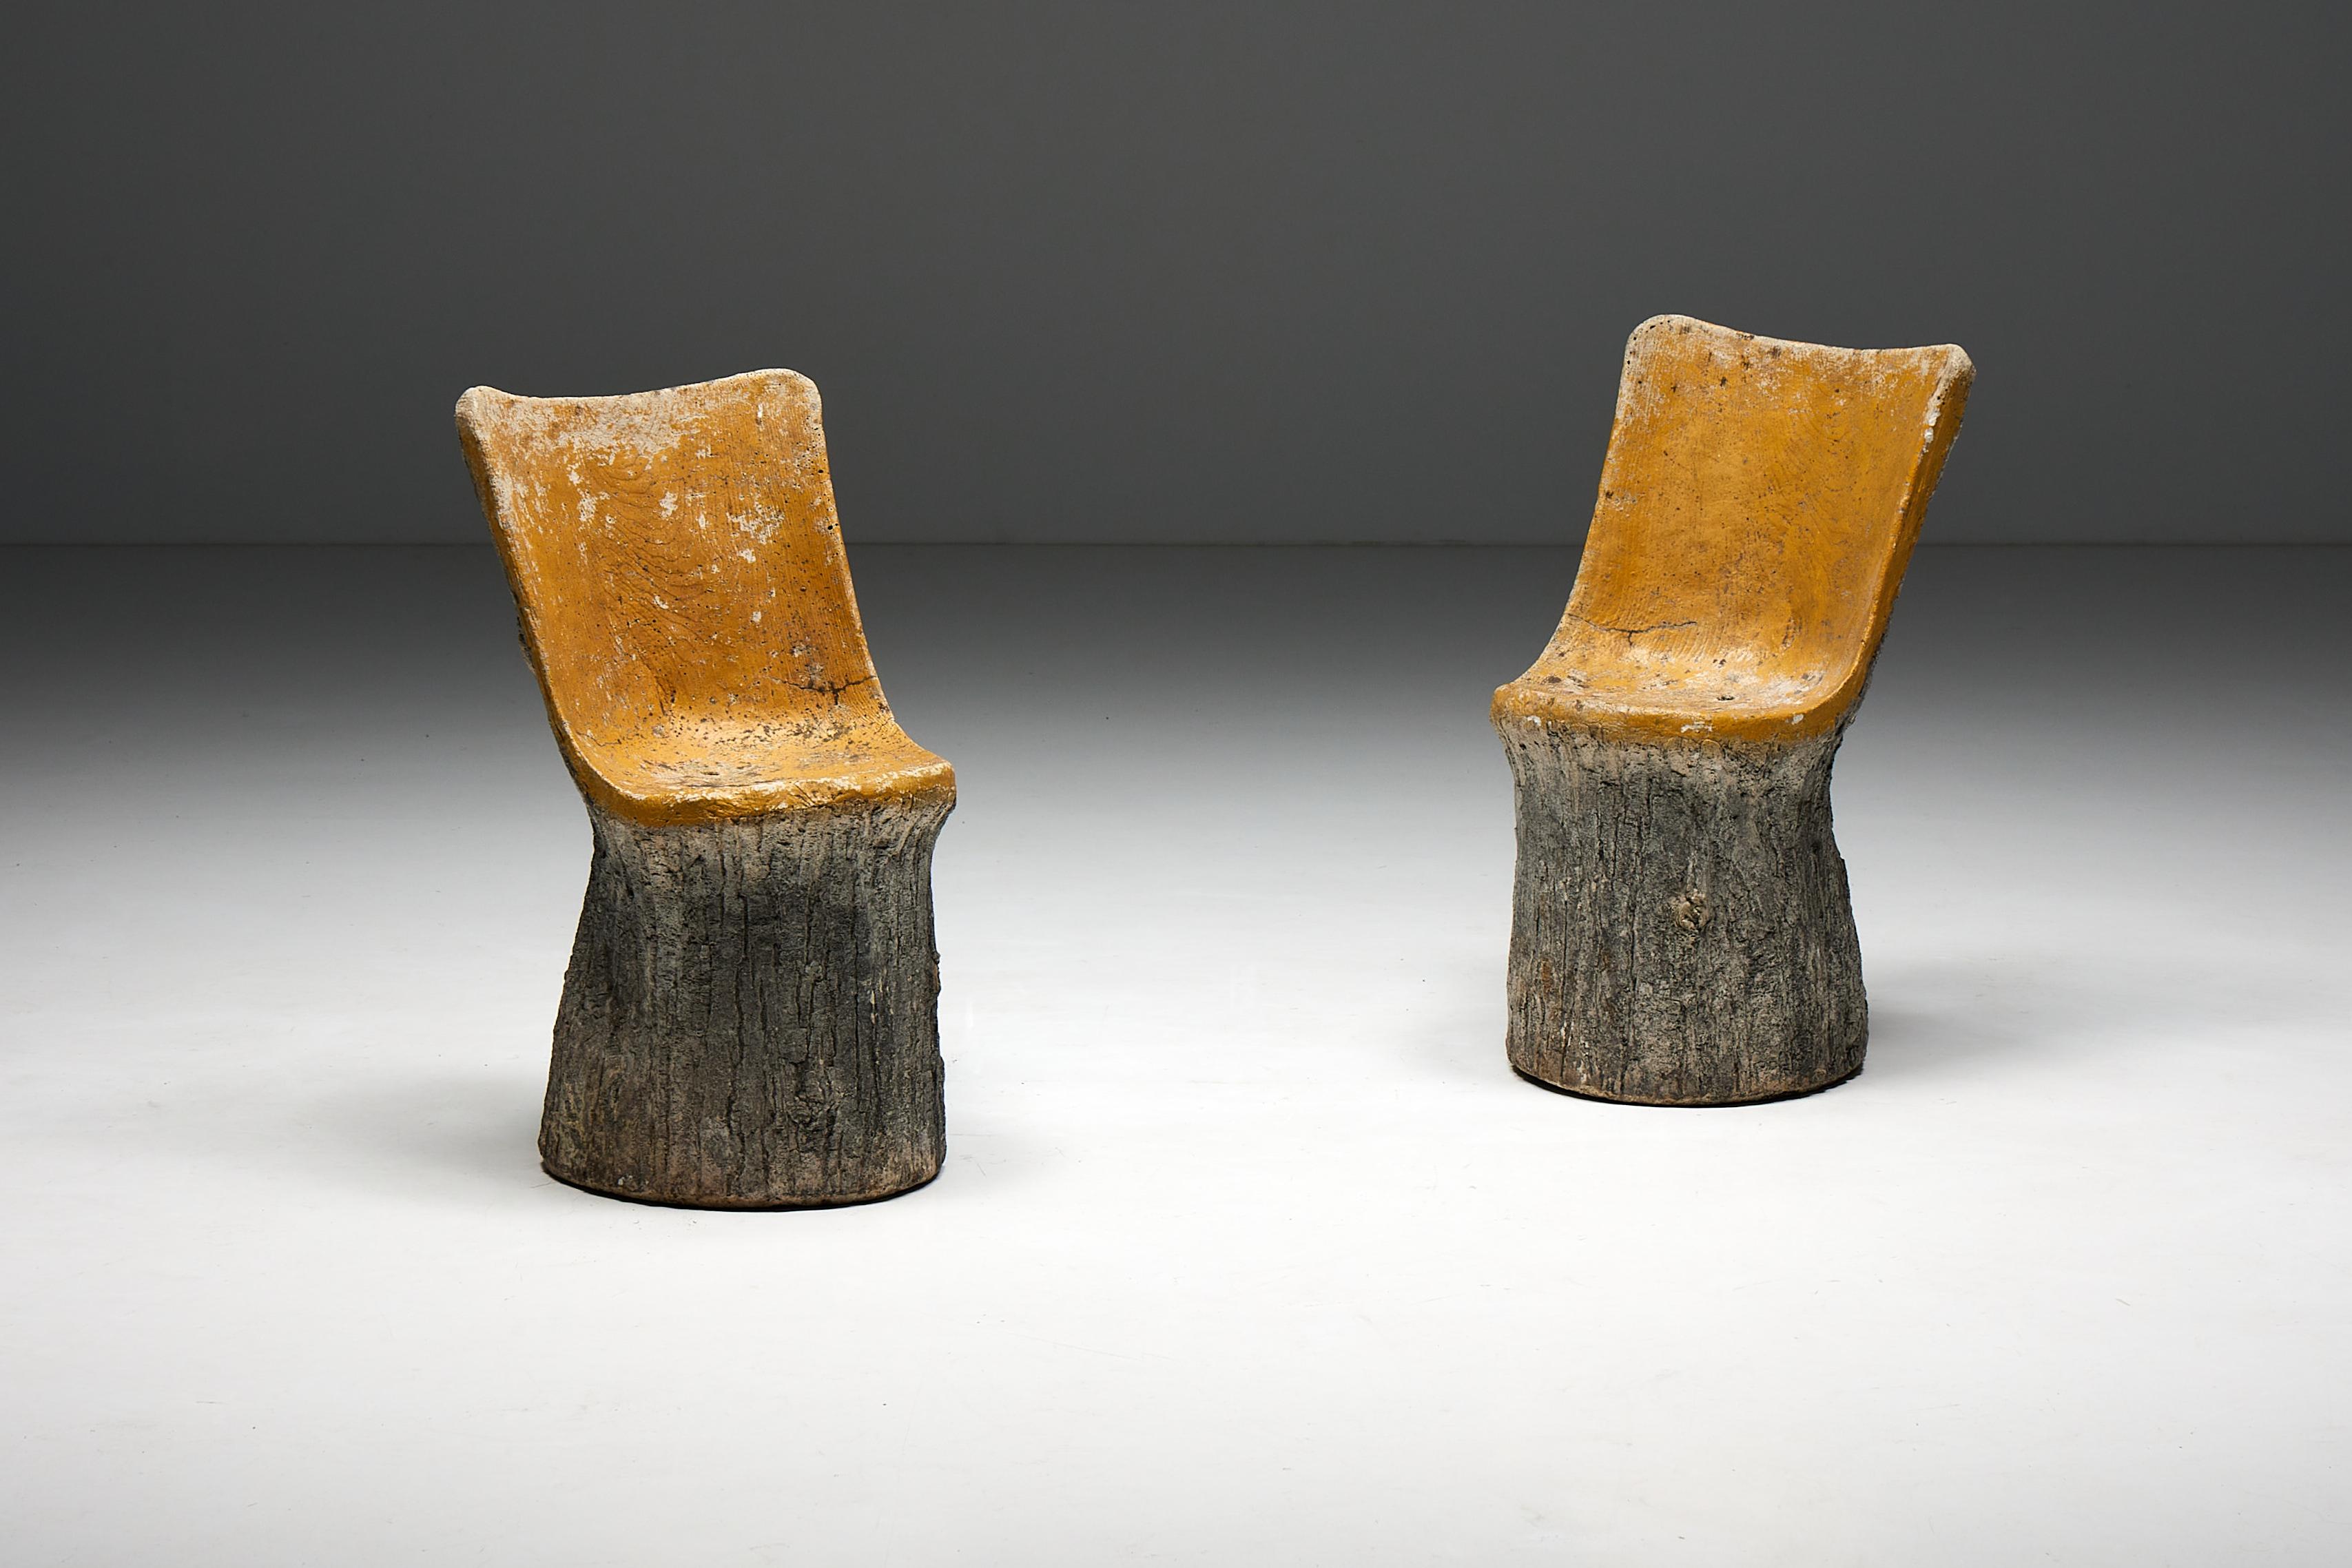 French Brutalist Concrete Chairs, France, 1970s